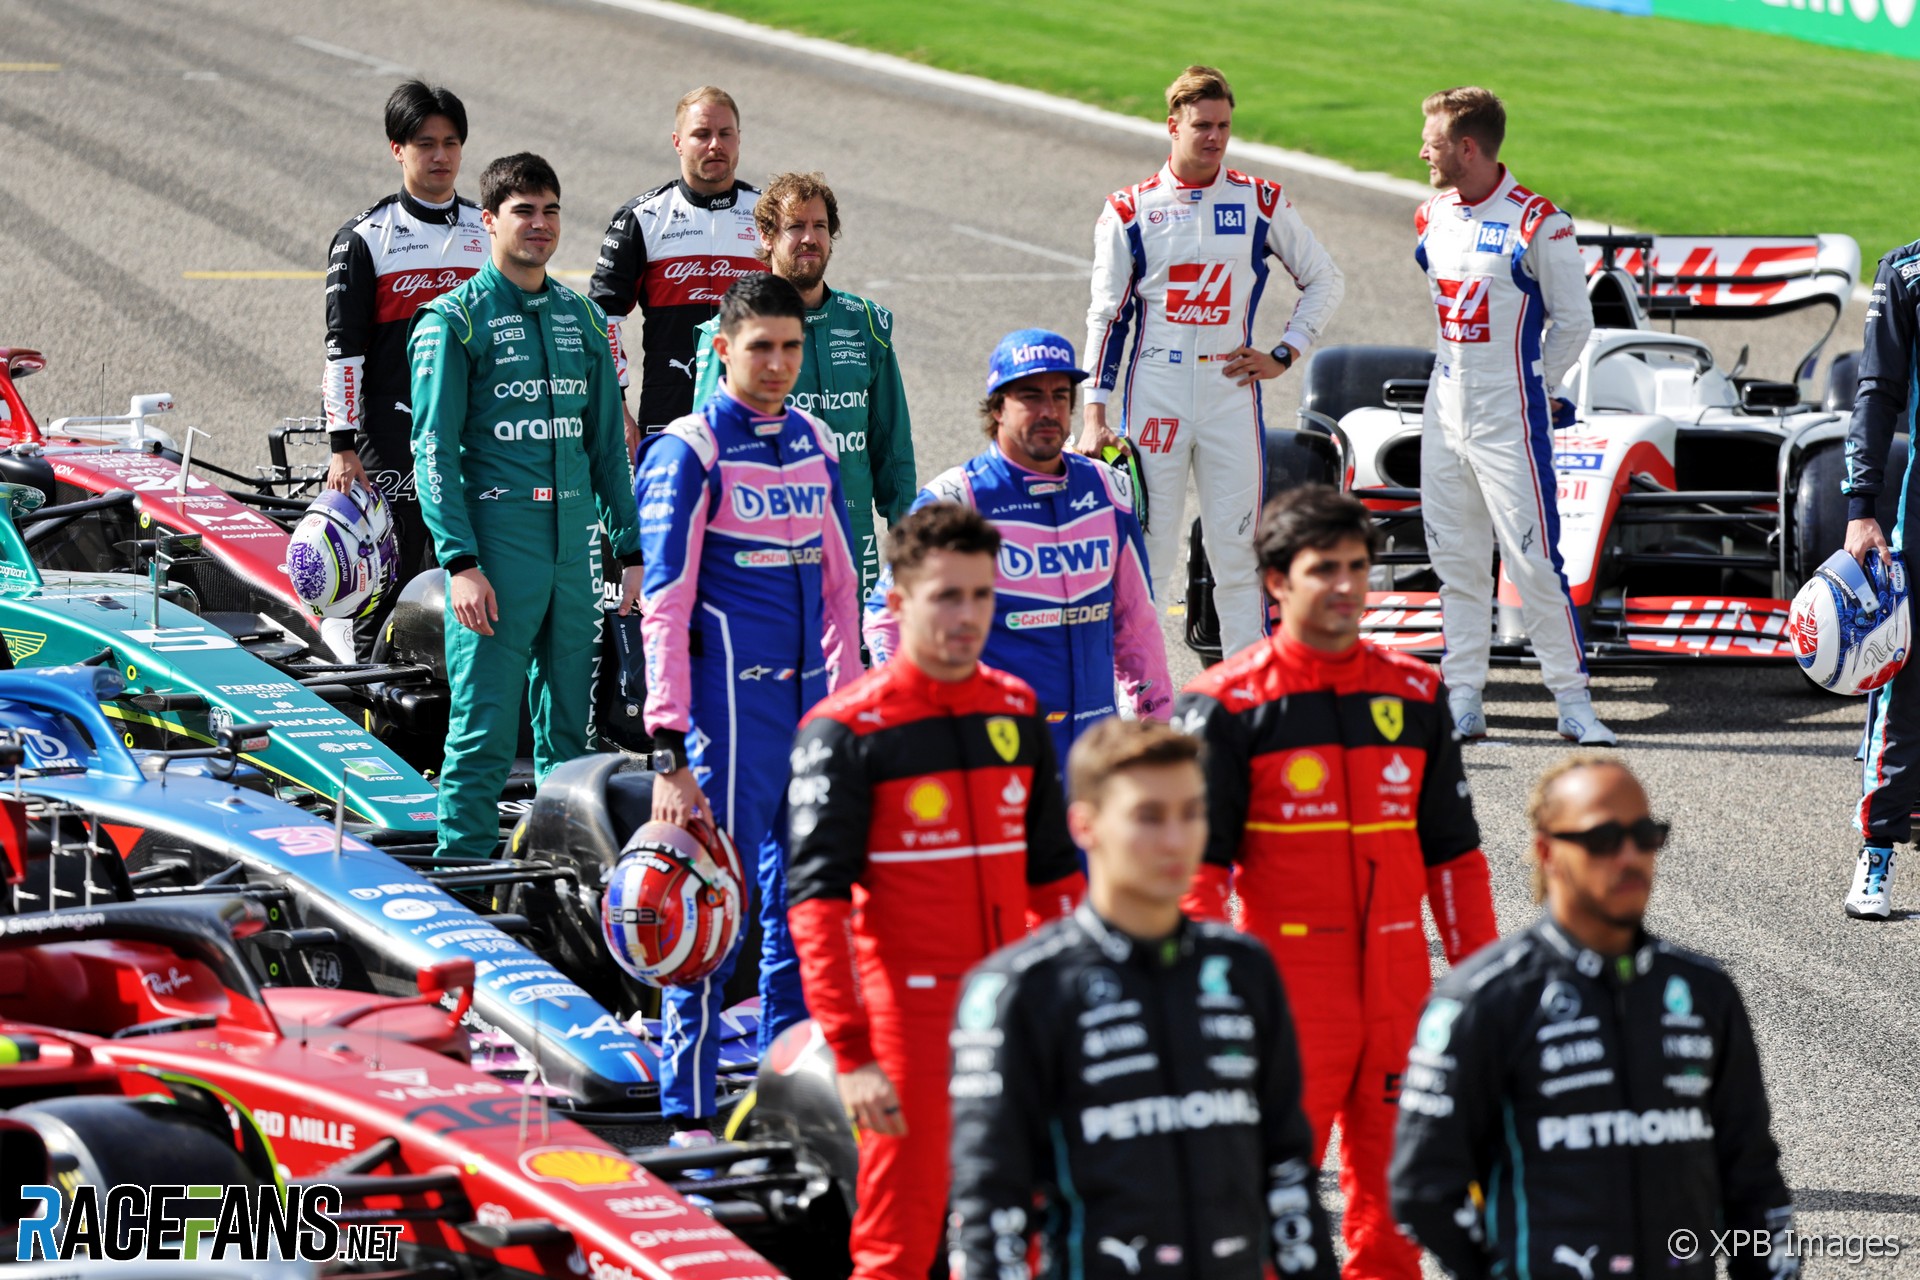 2023 F1 drivers and teams · RaceFans